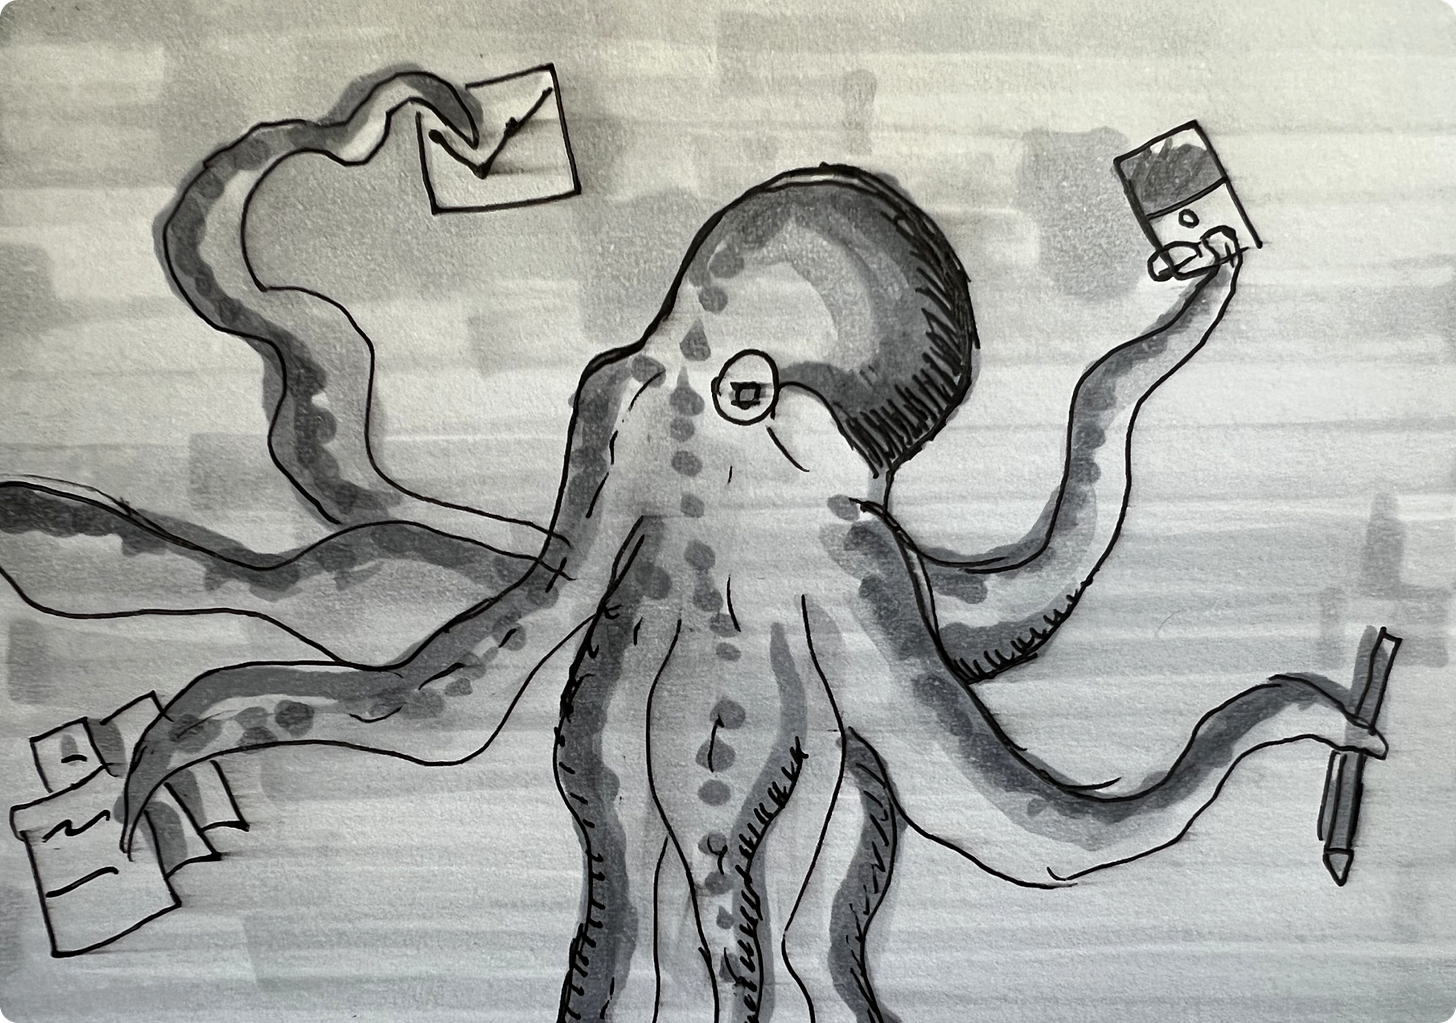 Drawing of octopus holding a stack of paper, pen, phone and chart representing being a generalist